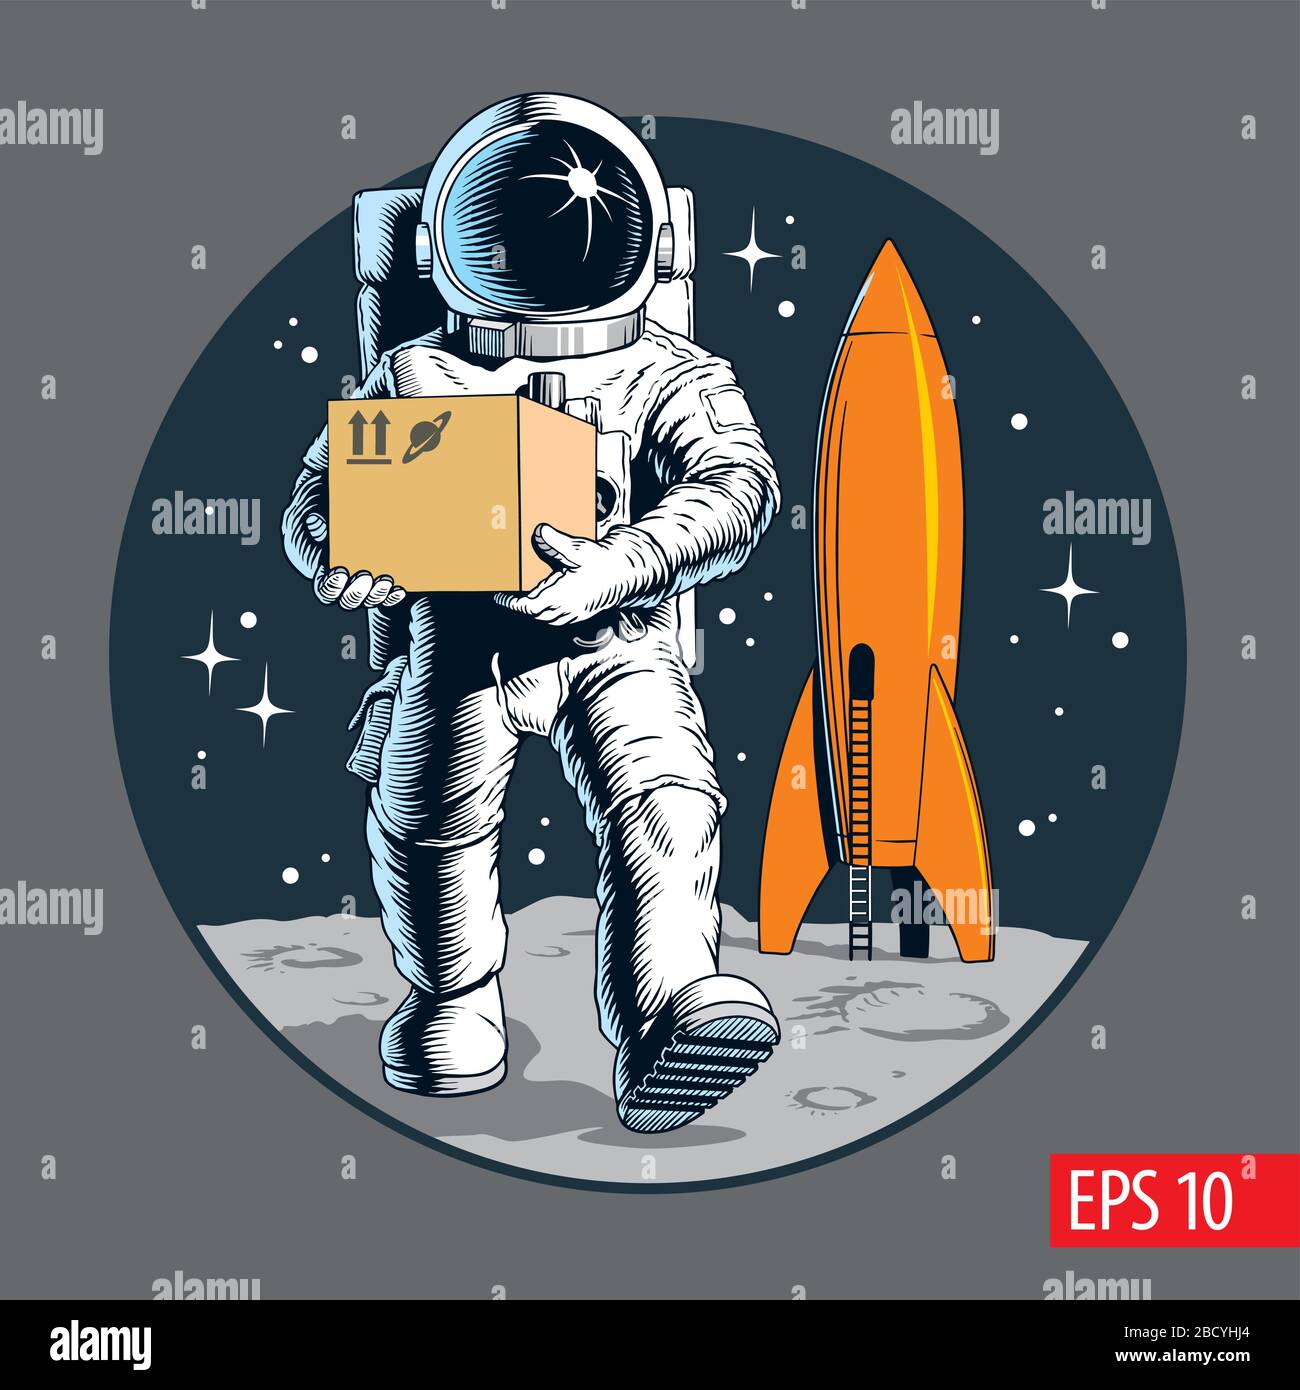 Delivery service, astronaut holding package or cardboard box. Space colonization. Shipping cargo to space. Comic style vector illustration. Stock Vector